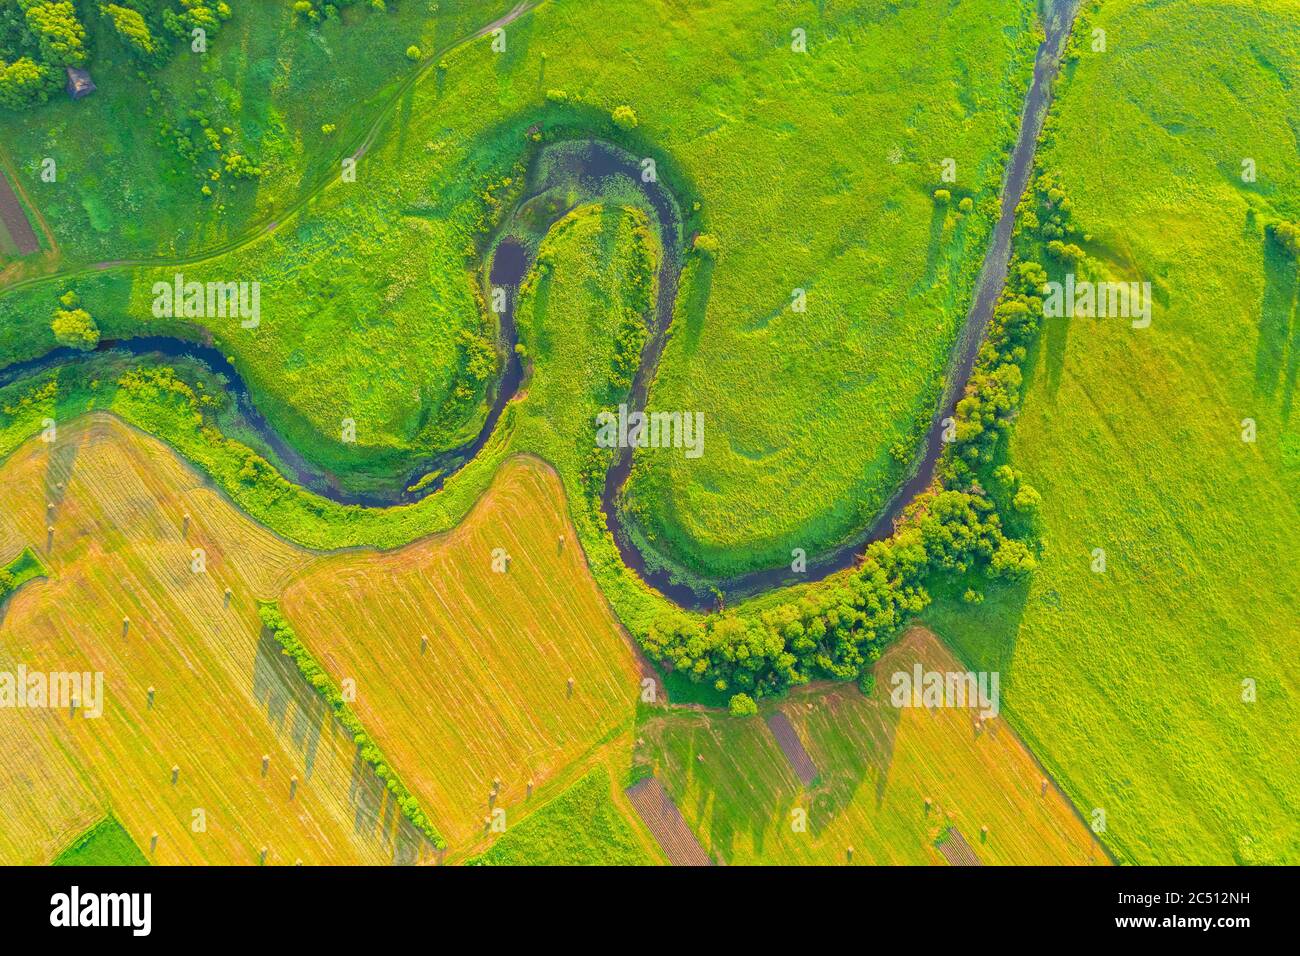 Top aerial view of the natural landscape valley of a meandering river among green fields and forests Stock Photo